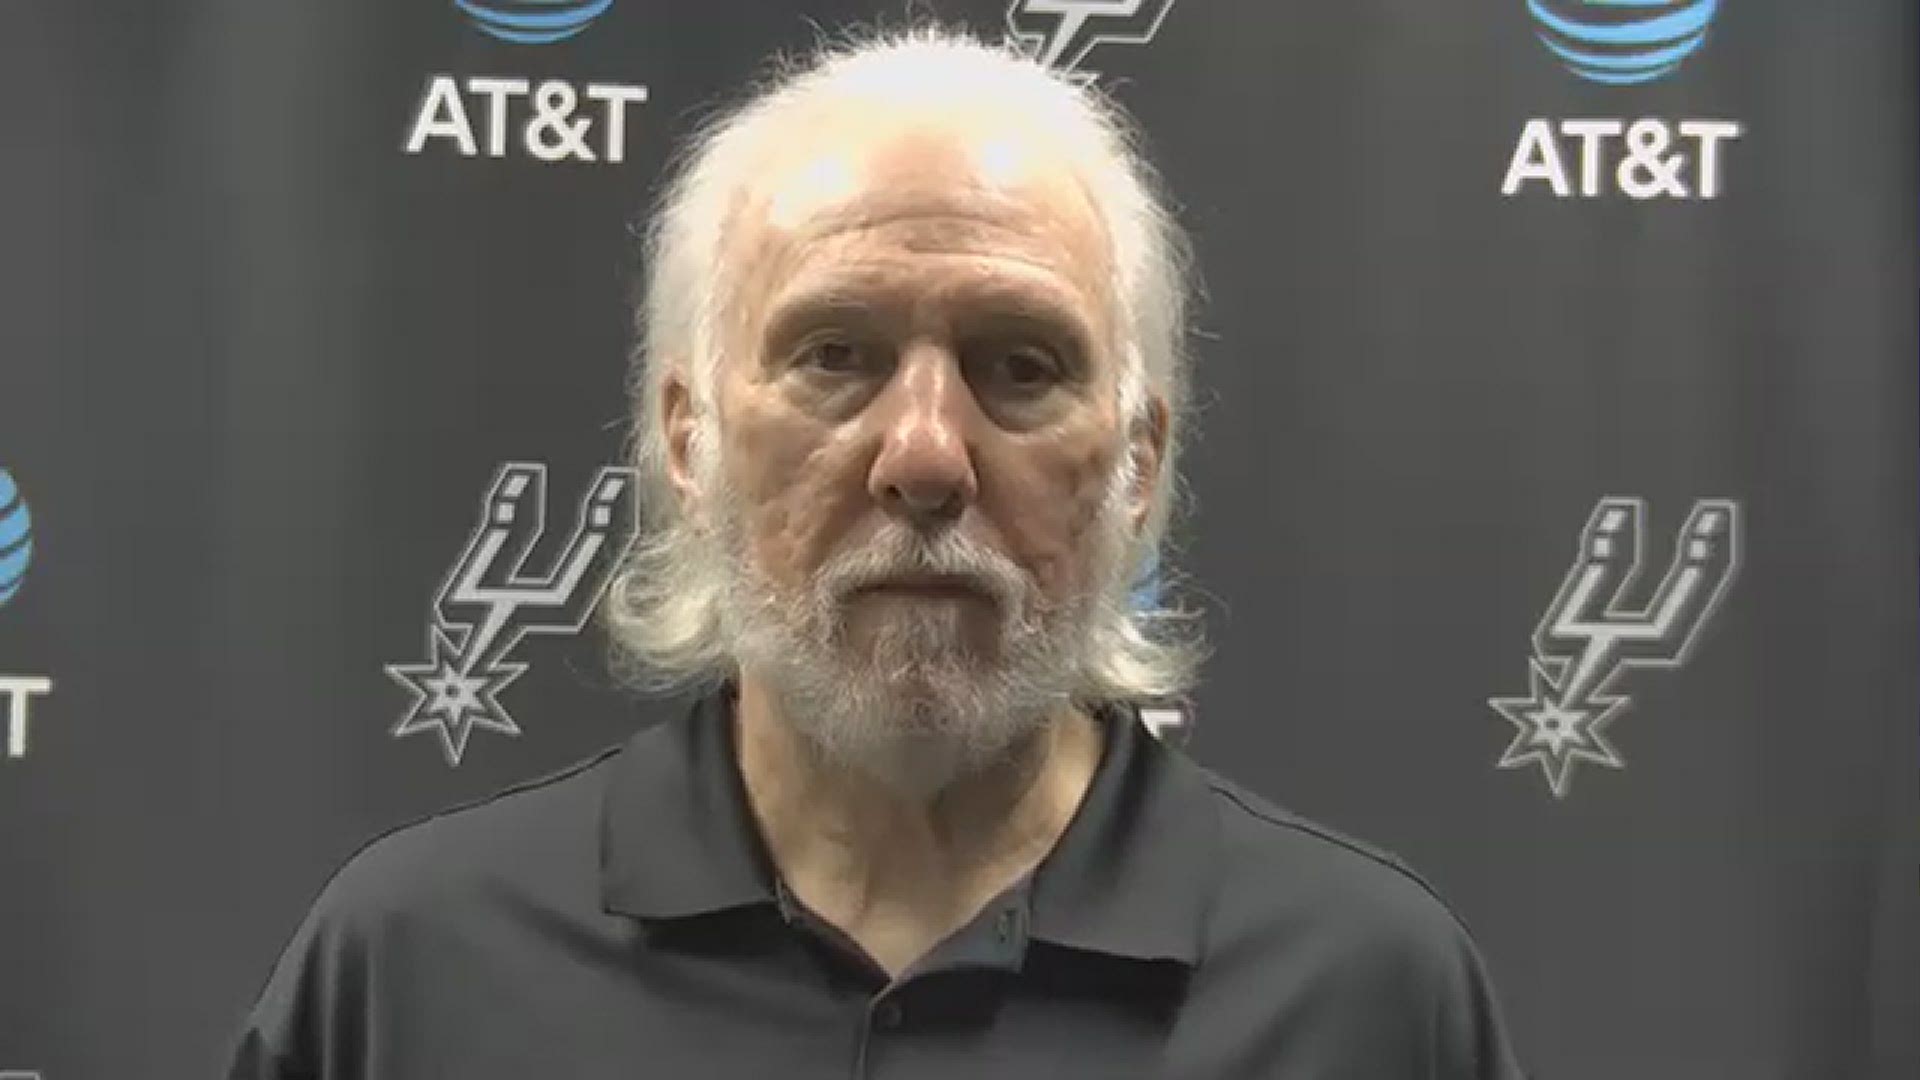 Popovich commended the ball movement, shot making, defensive intensity, and rebounding in the win.